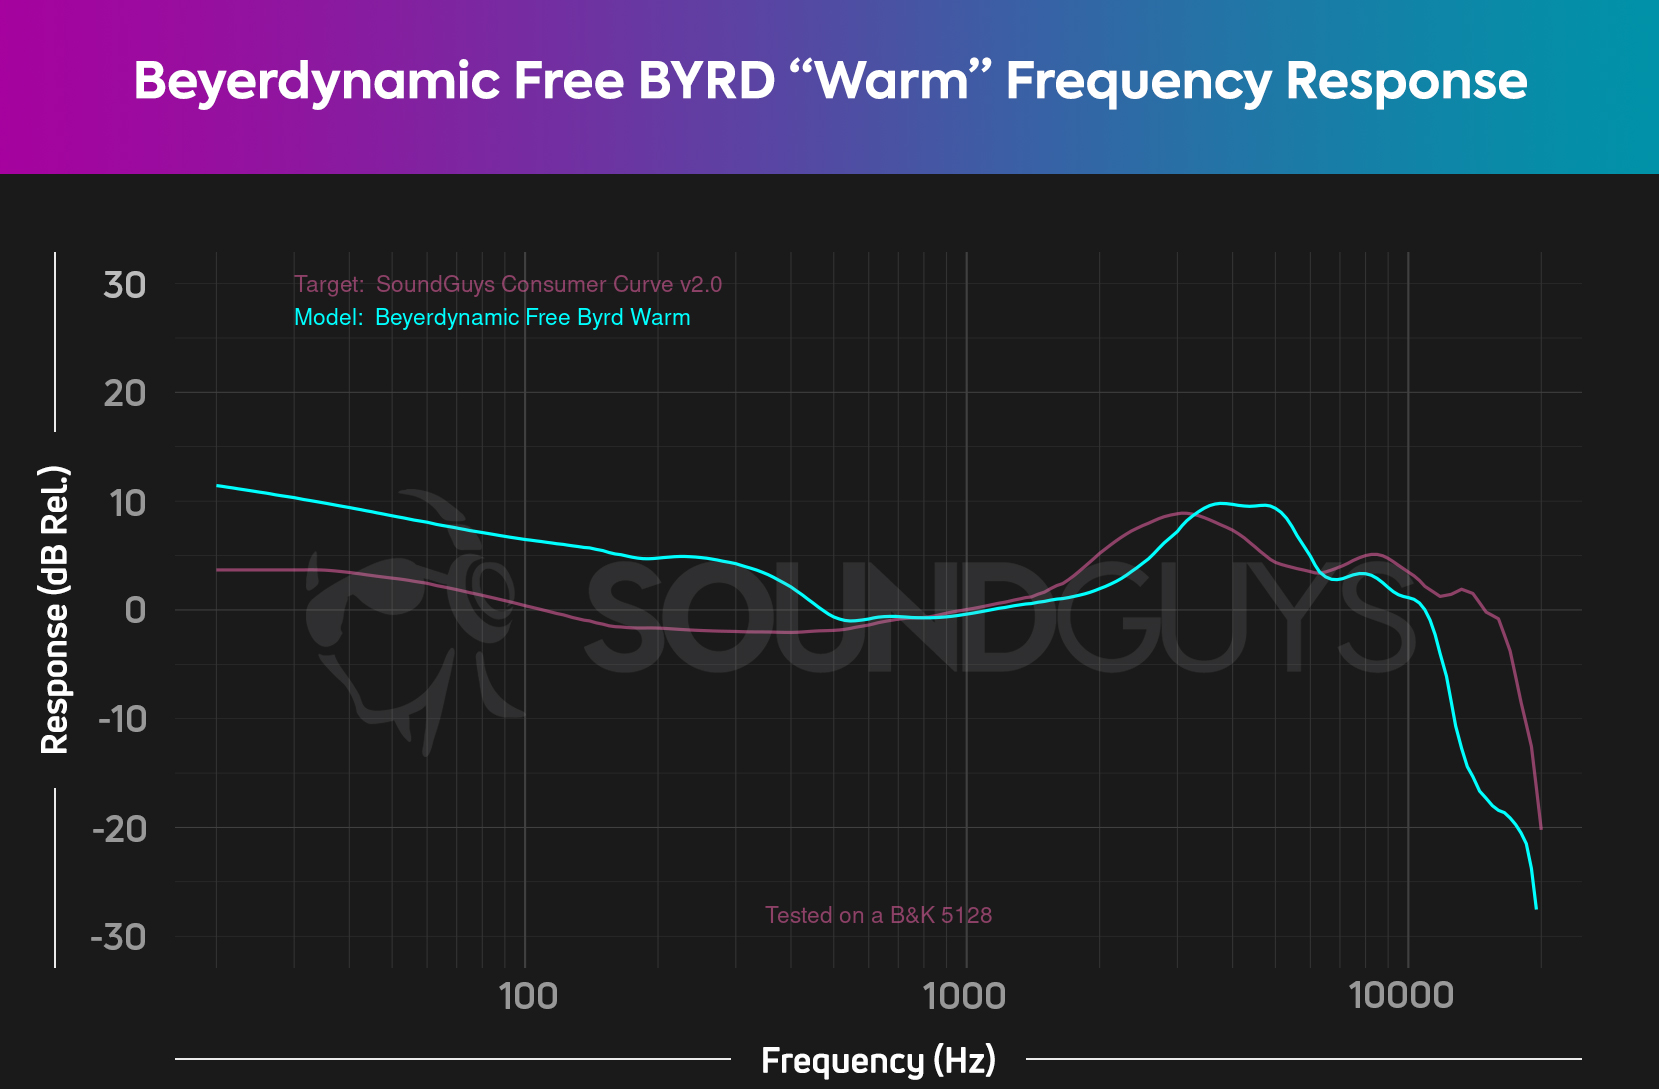 A chart depicts the Beyerdynamic Free BYRD frequency response with the "Warm" EQ preset enabled, which looks fairly similar to the default response but with a greater boost from 200-500Hz.